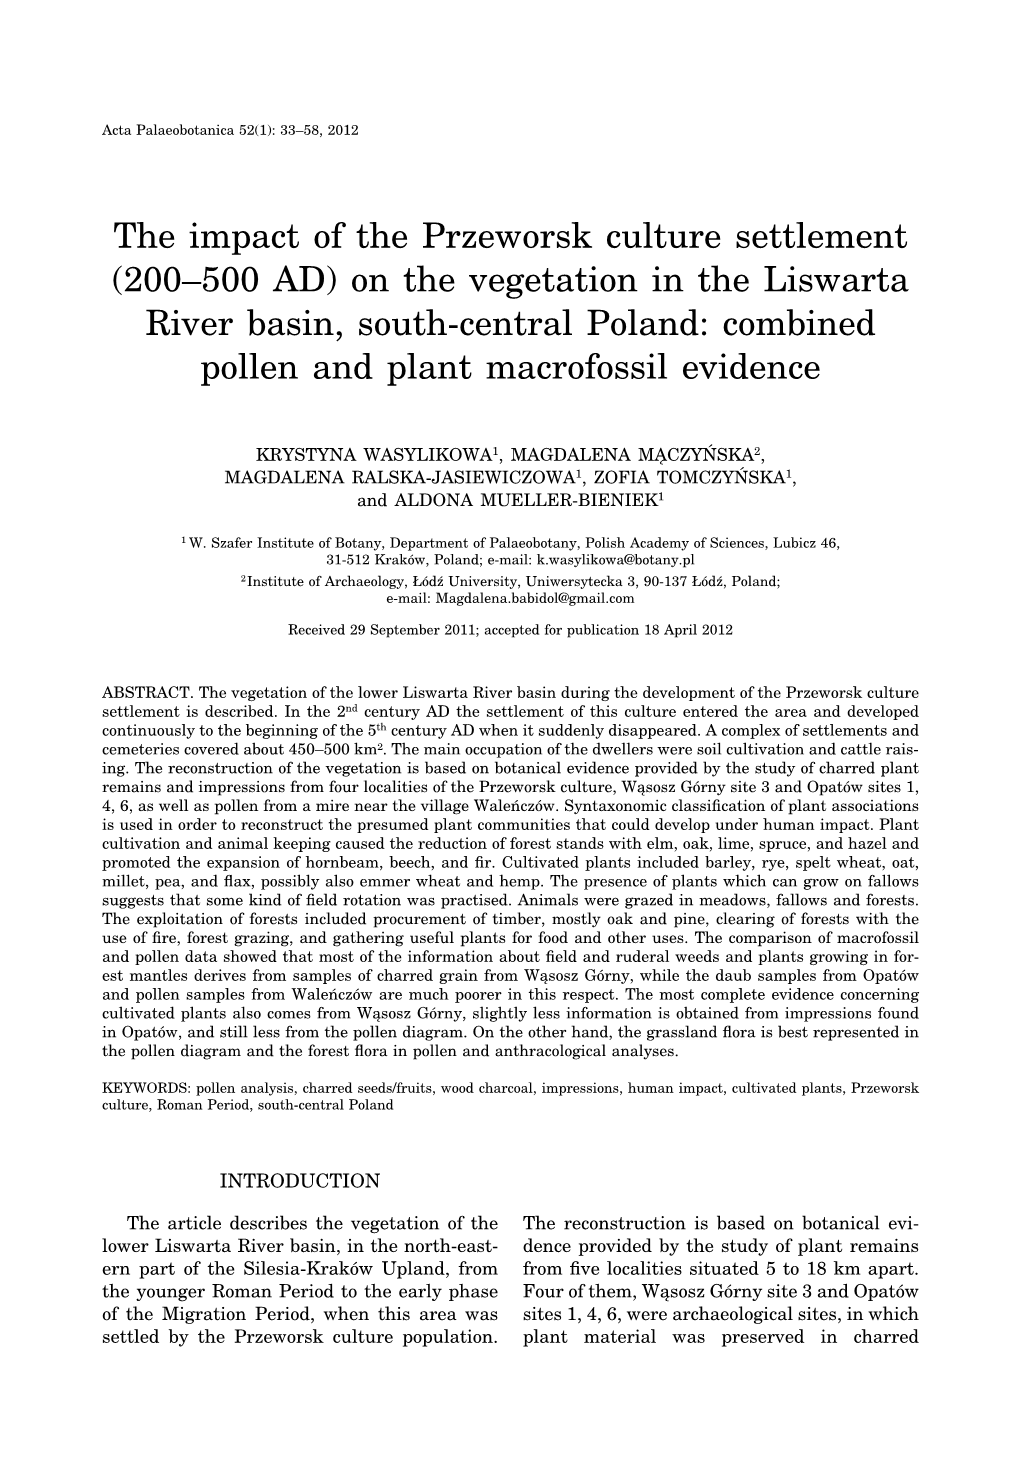 The Impact of the Przeworsk Culture Settlement (200–500